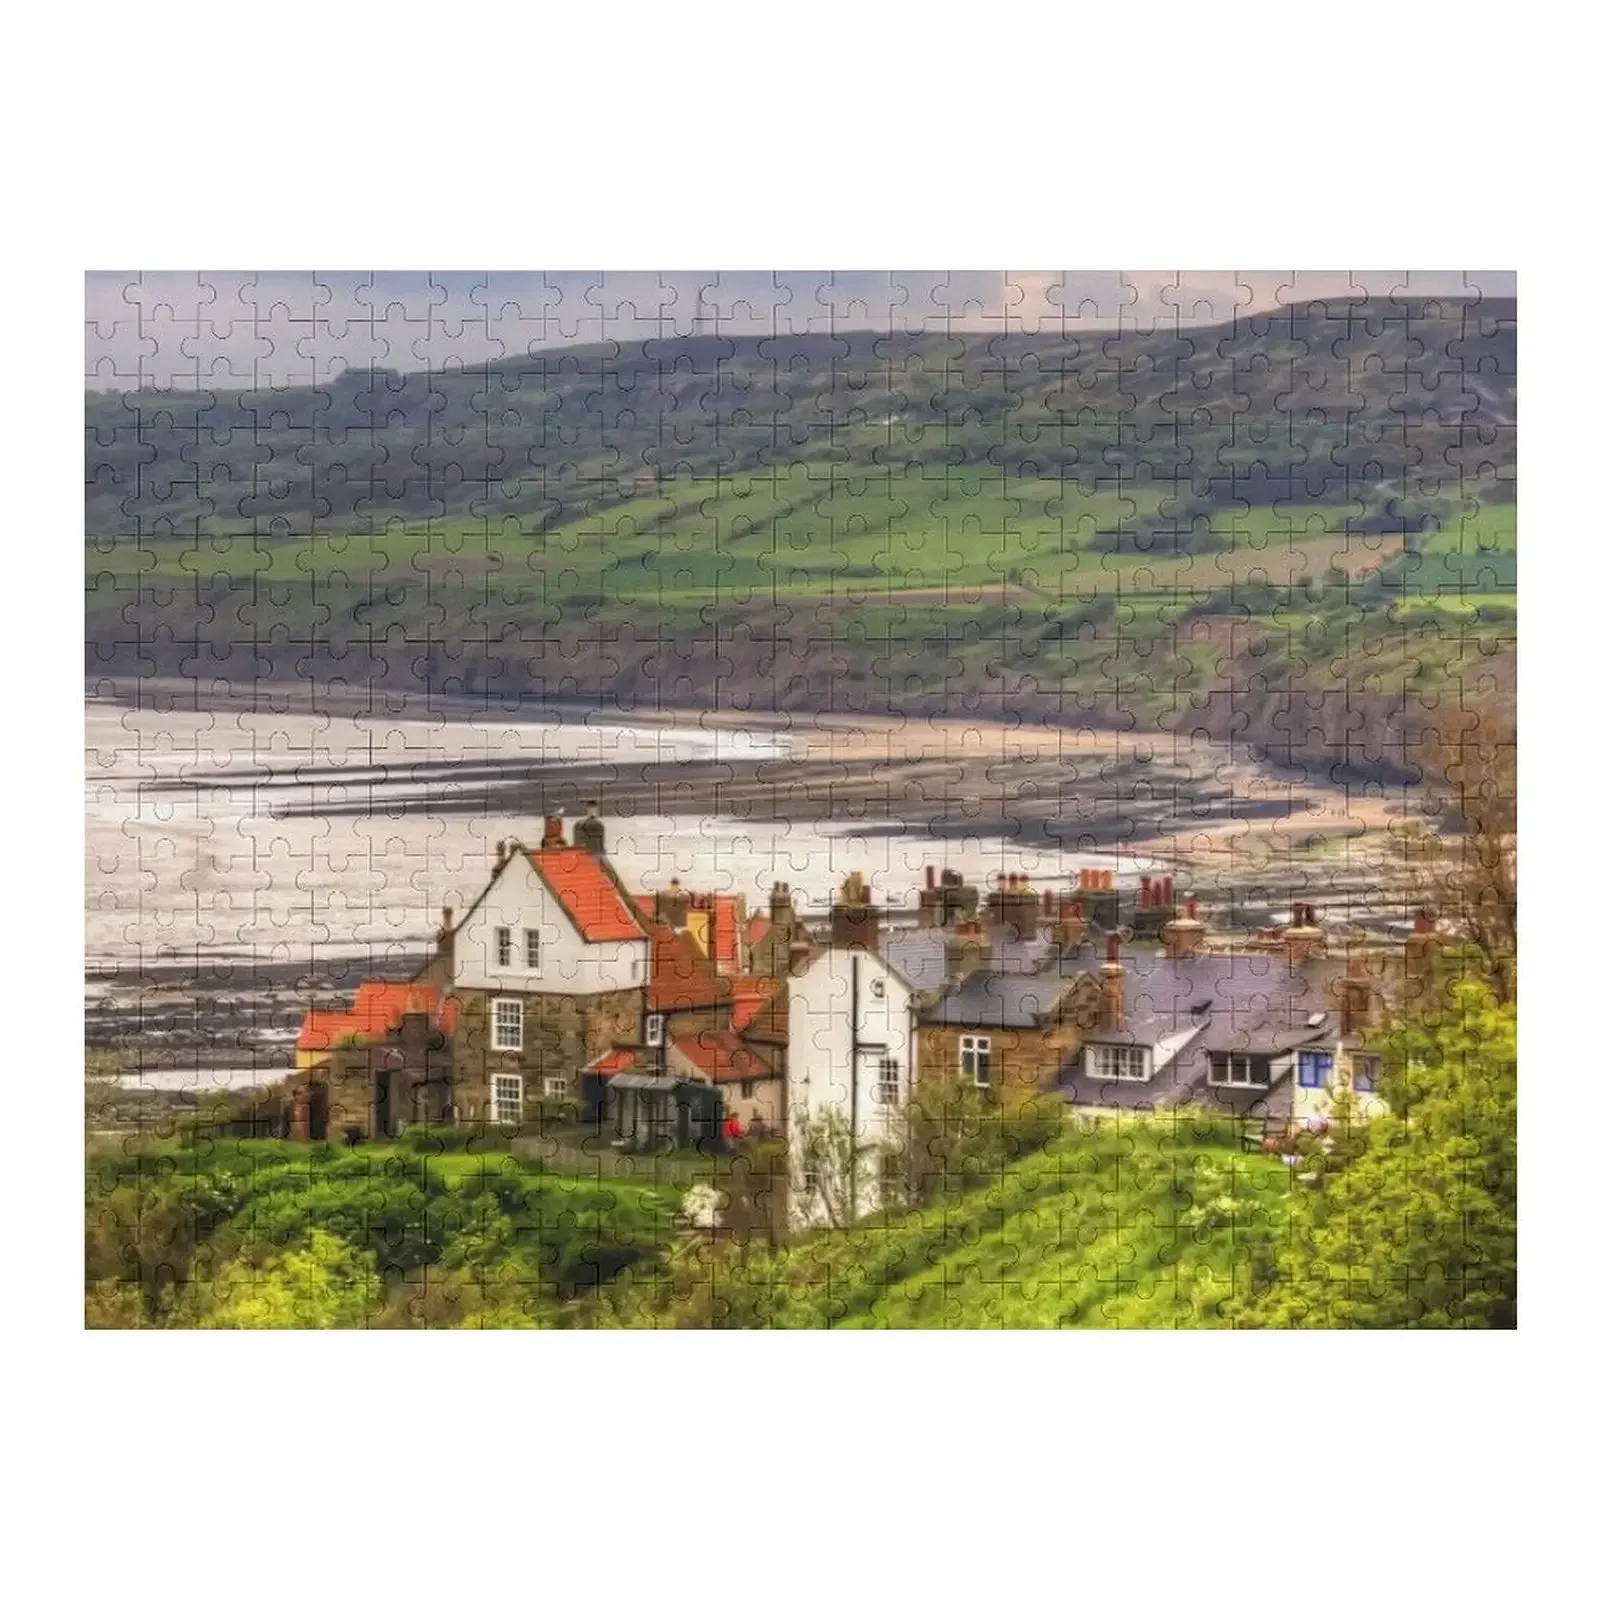 First view of Robin Hood's Bay Jigsaw Puzzle Personalised Woods For Adults Jigsaw For Kids Wooden Name Puzzle first view of robin hood s bay jigsaw puzzle personalised woods for adults jigsaw for kids wooden name puzzle